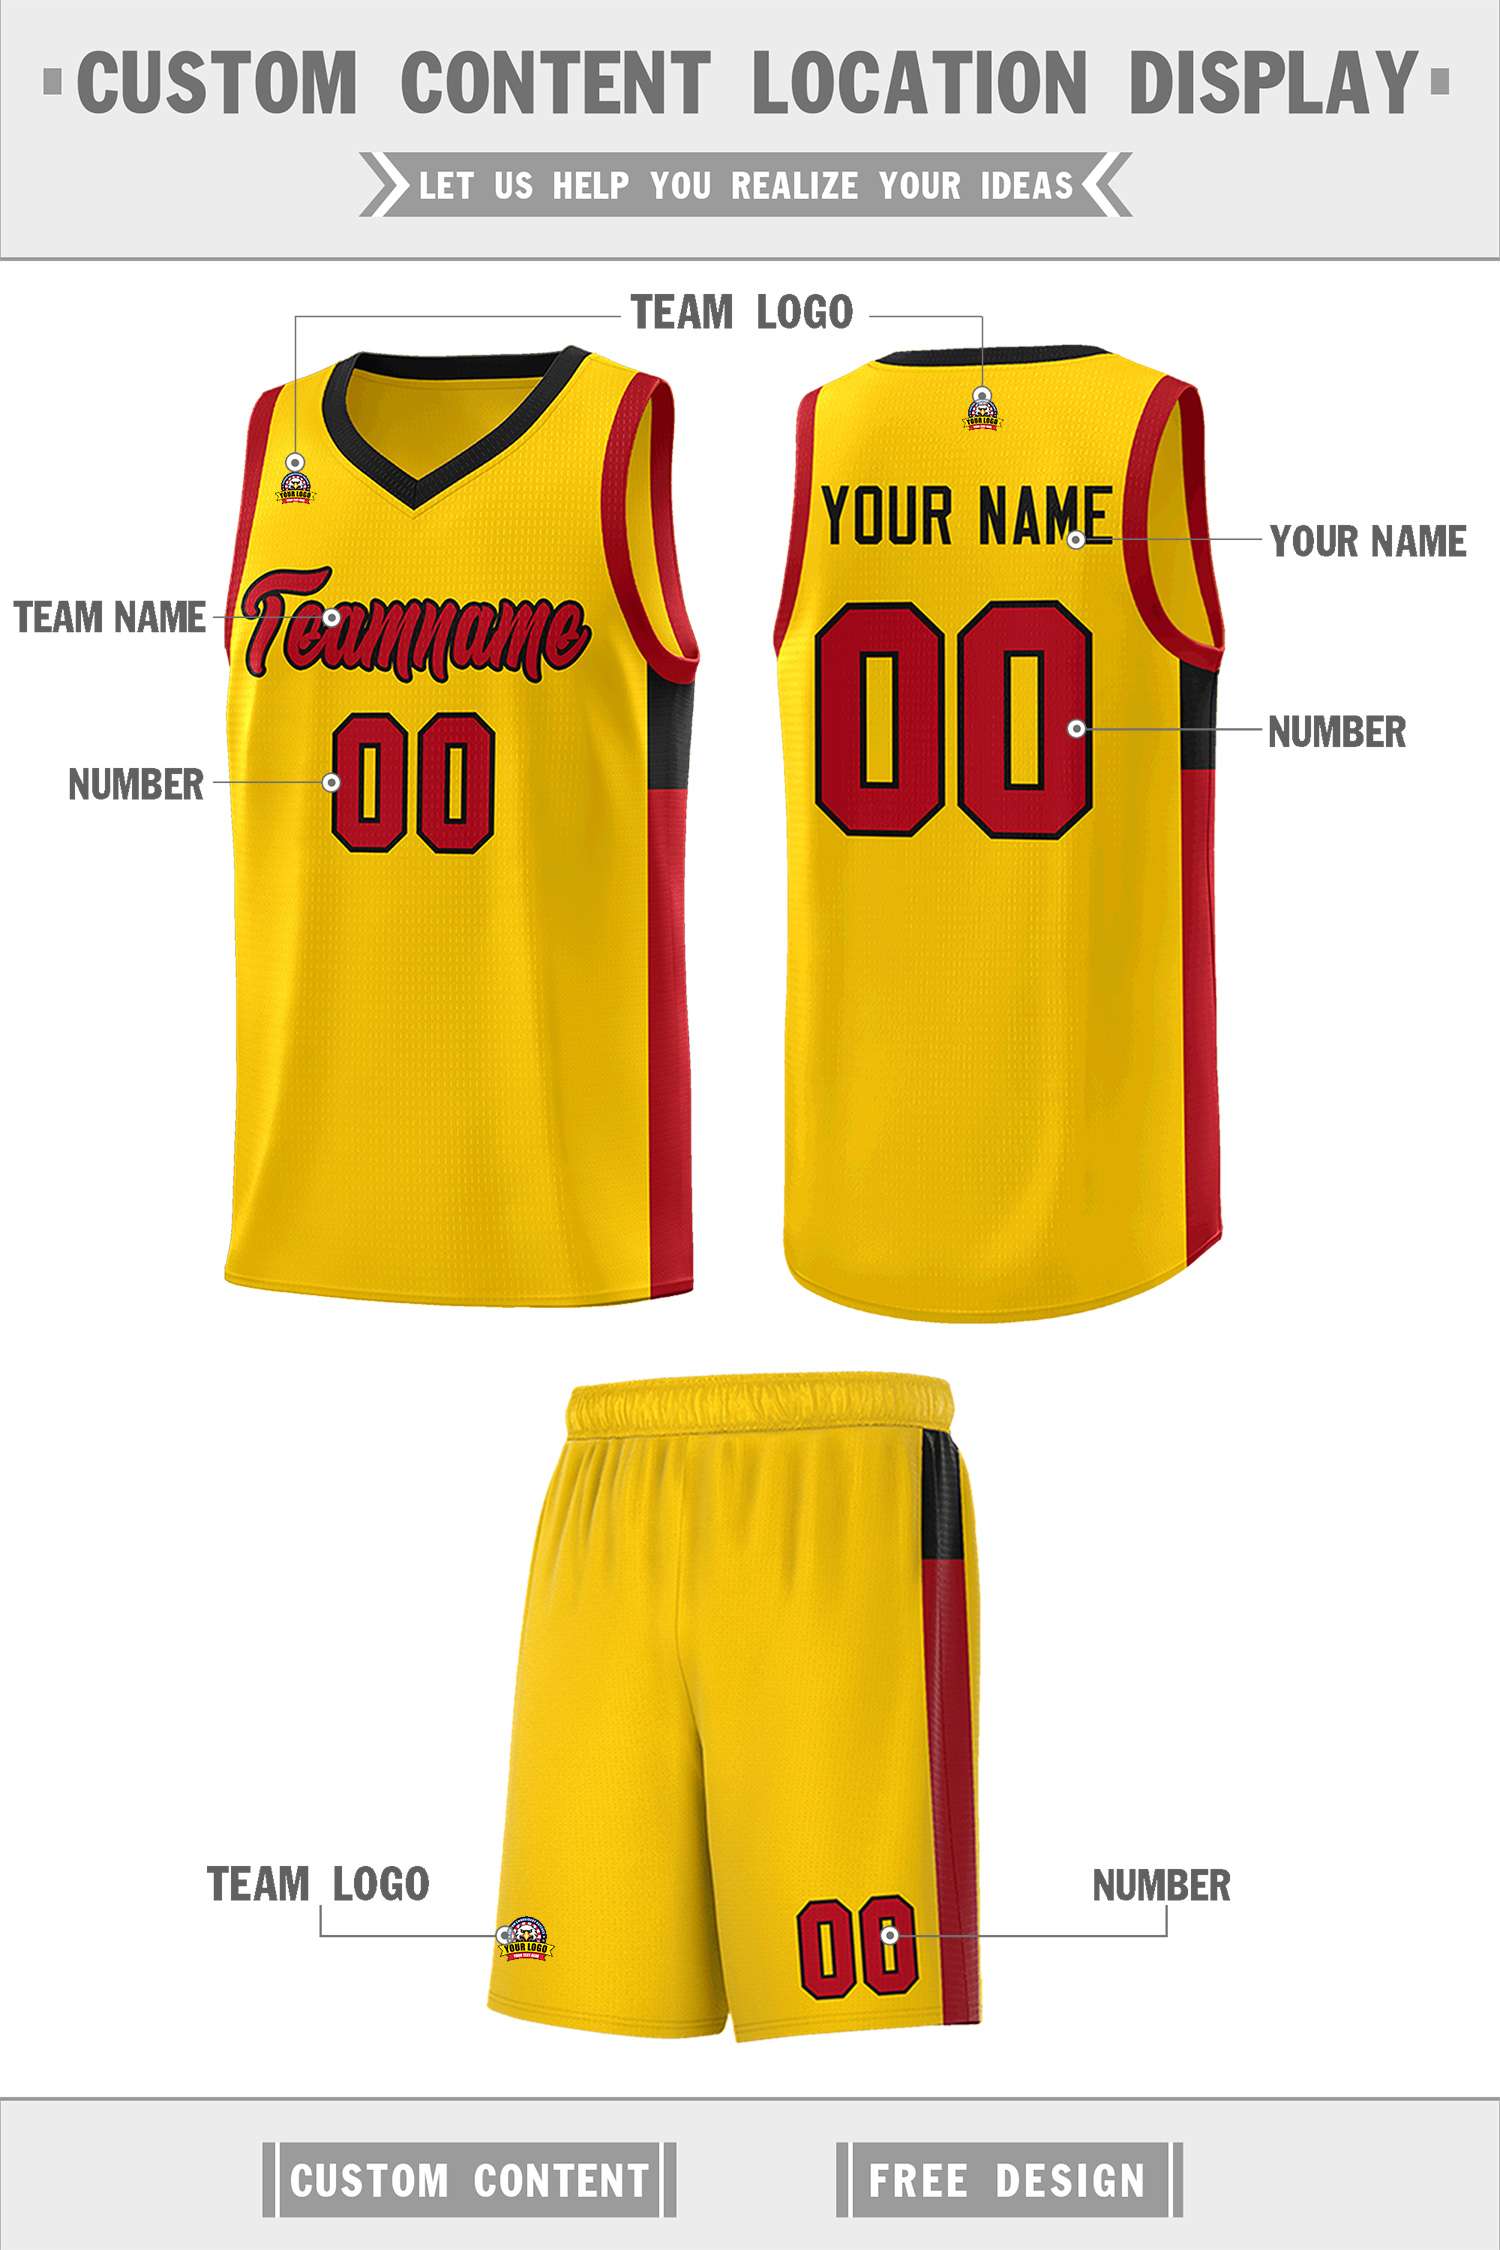 Custom Gold Red-Black Side Two-Tone Classic Sports Uniform Basketball Jersey